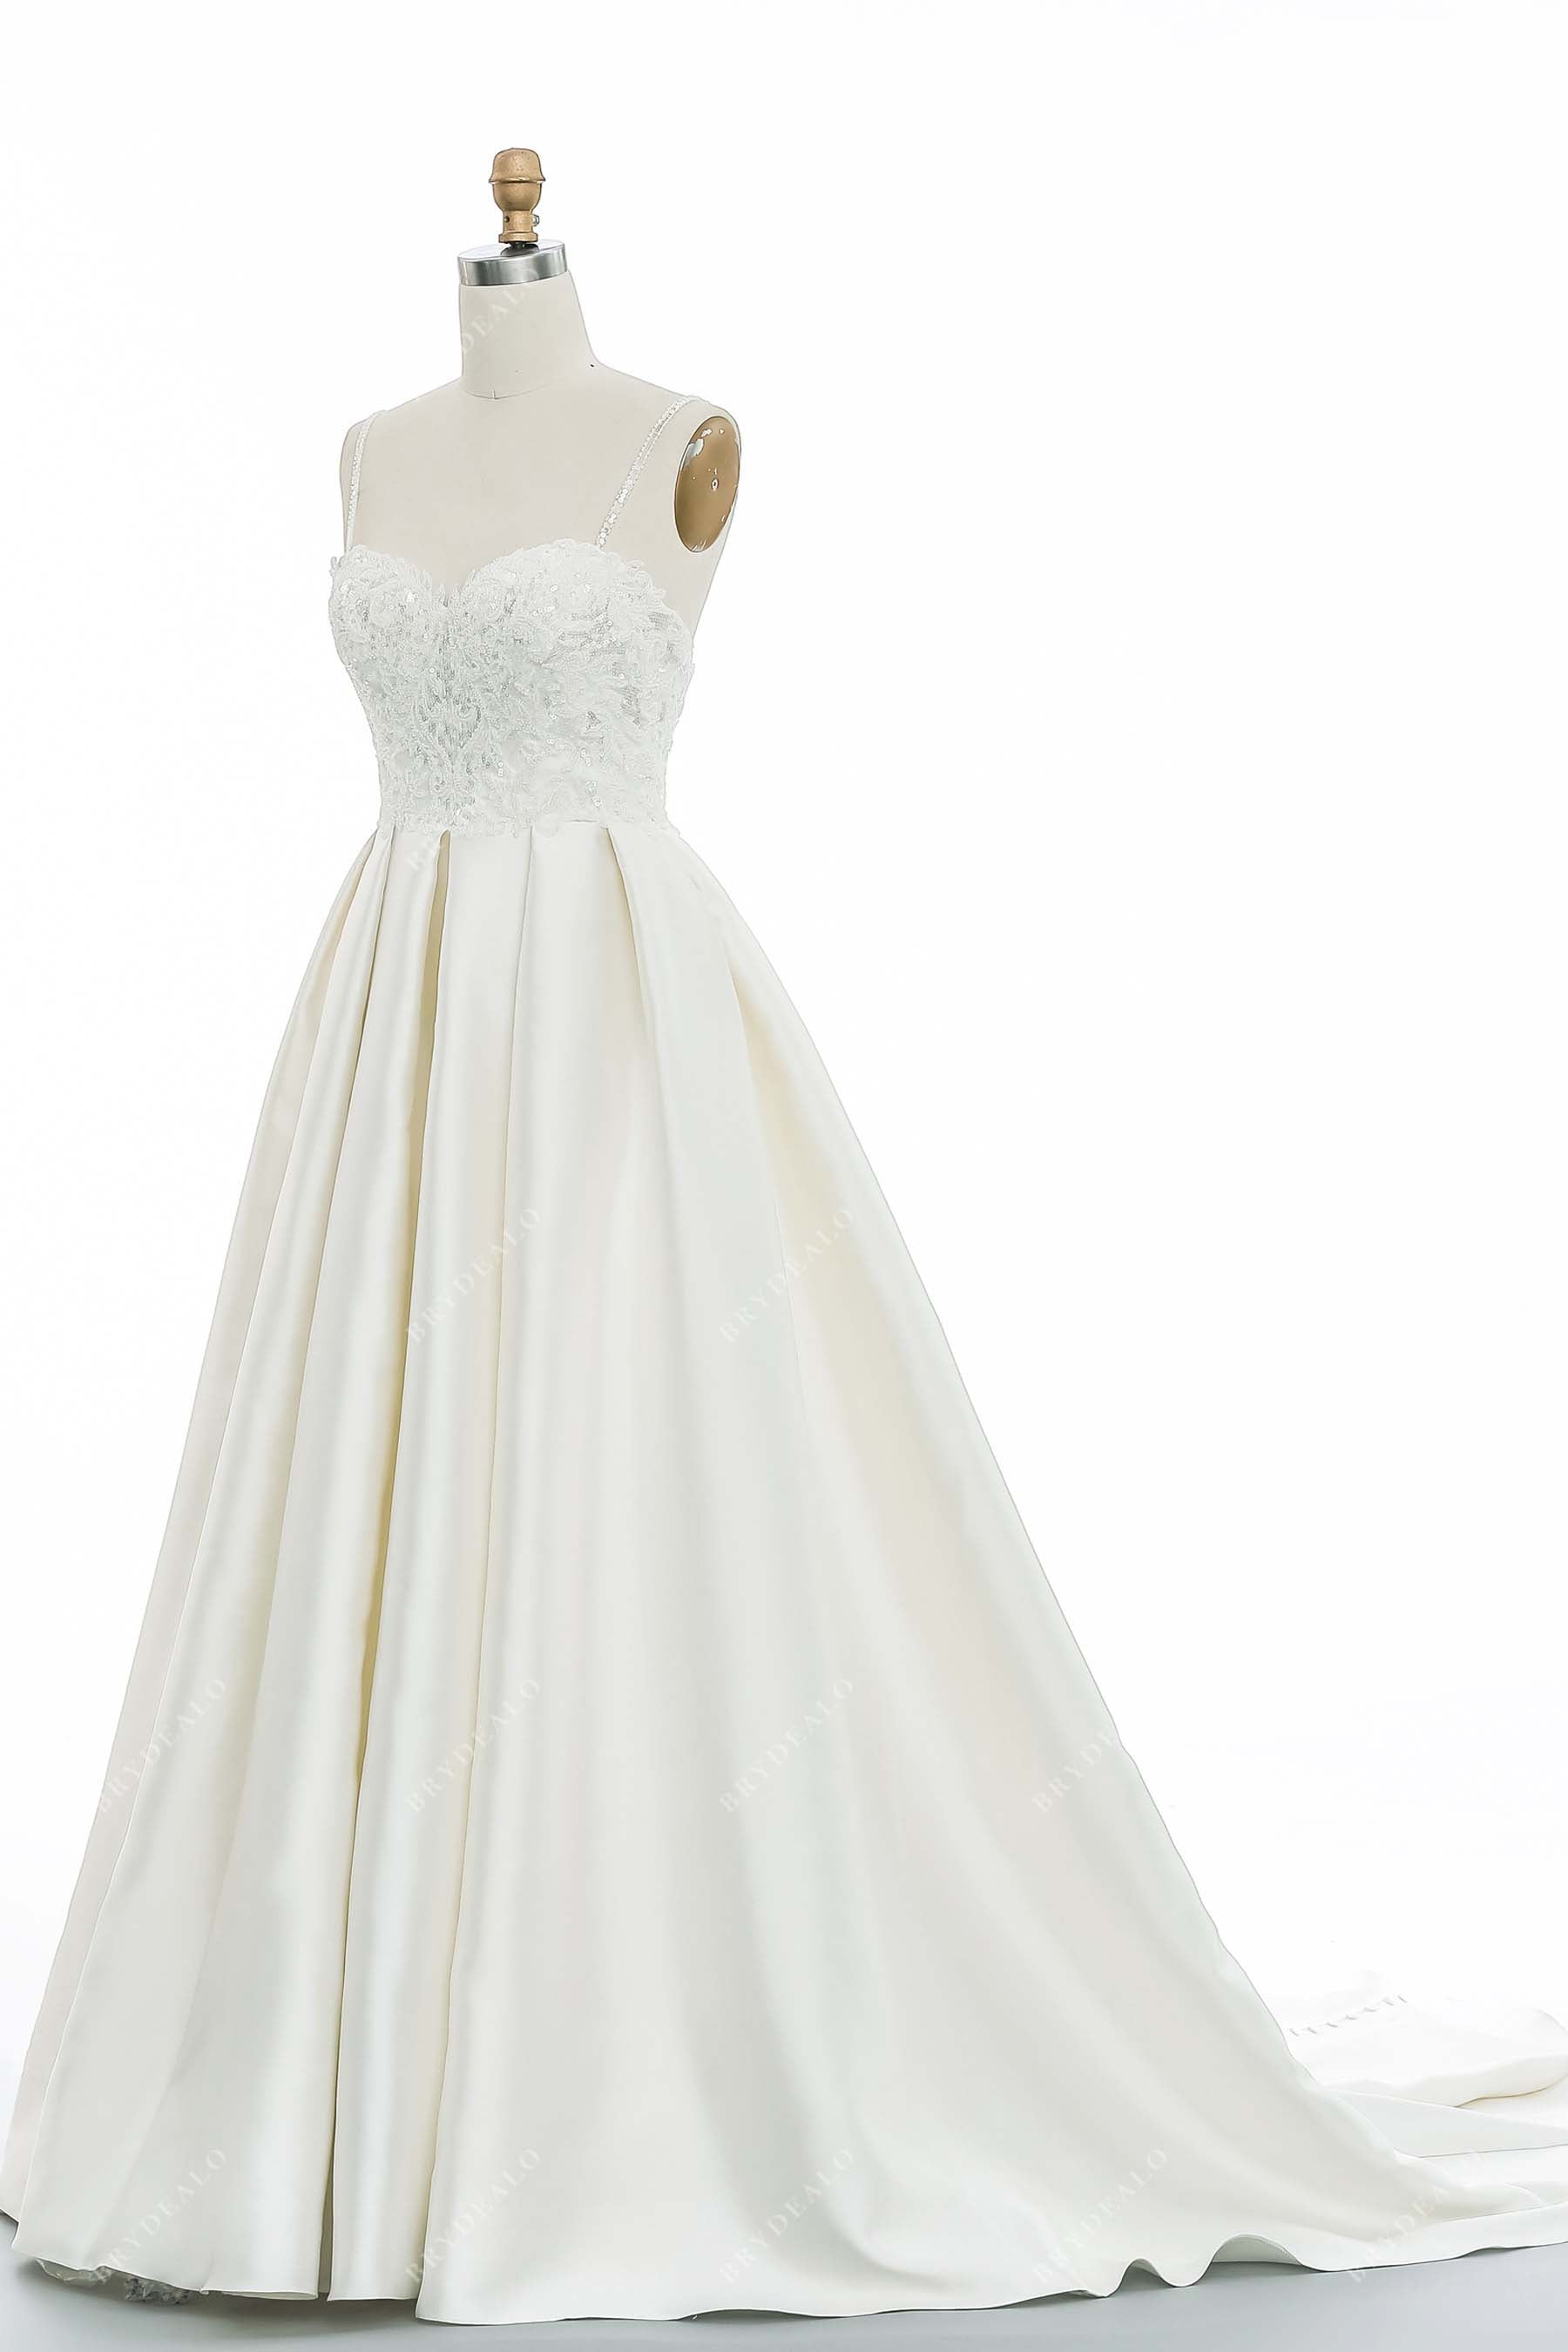 Lace Sweetheart Neck Satin Puffy A-line Wedding Dress